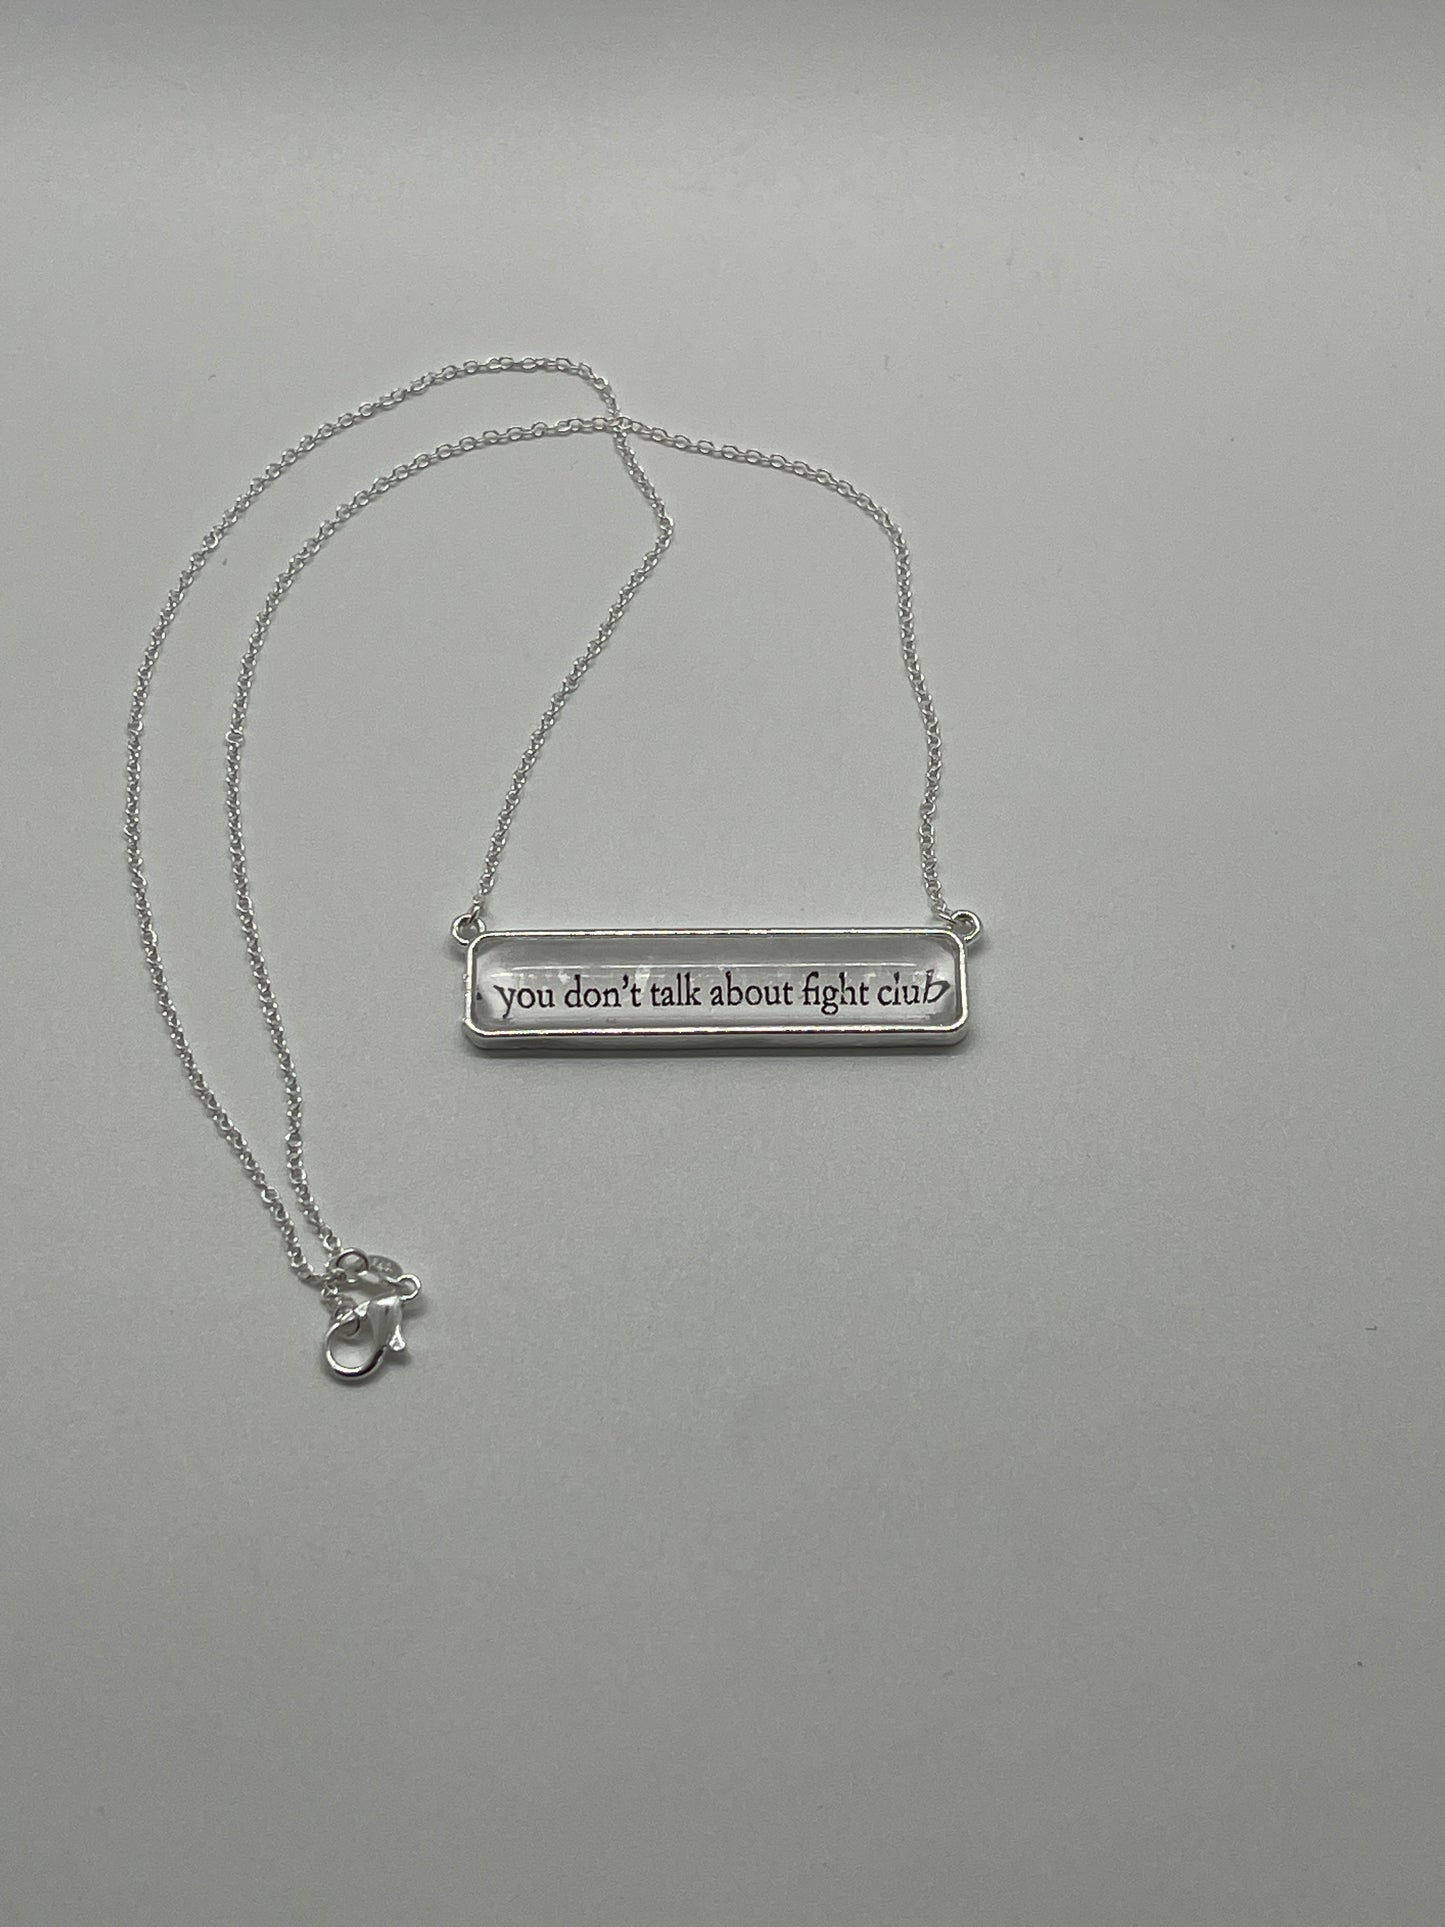 Literary Necklace: You Don’t Talk About Fight Club